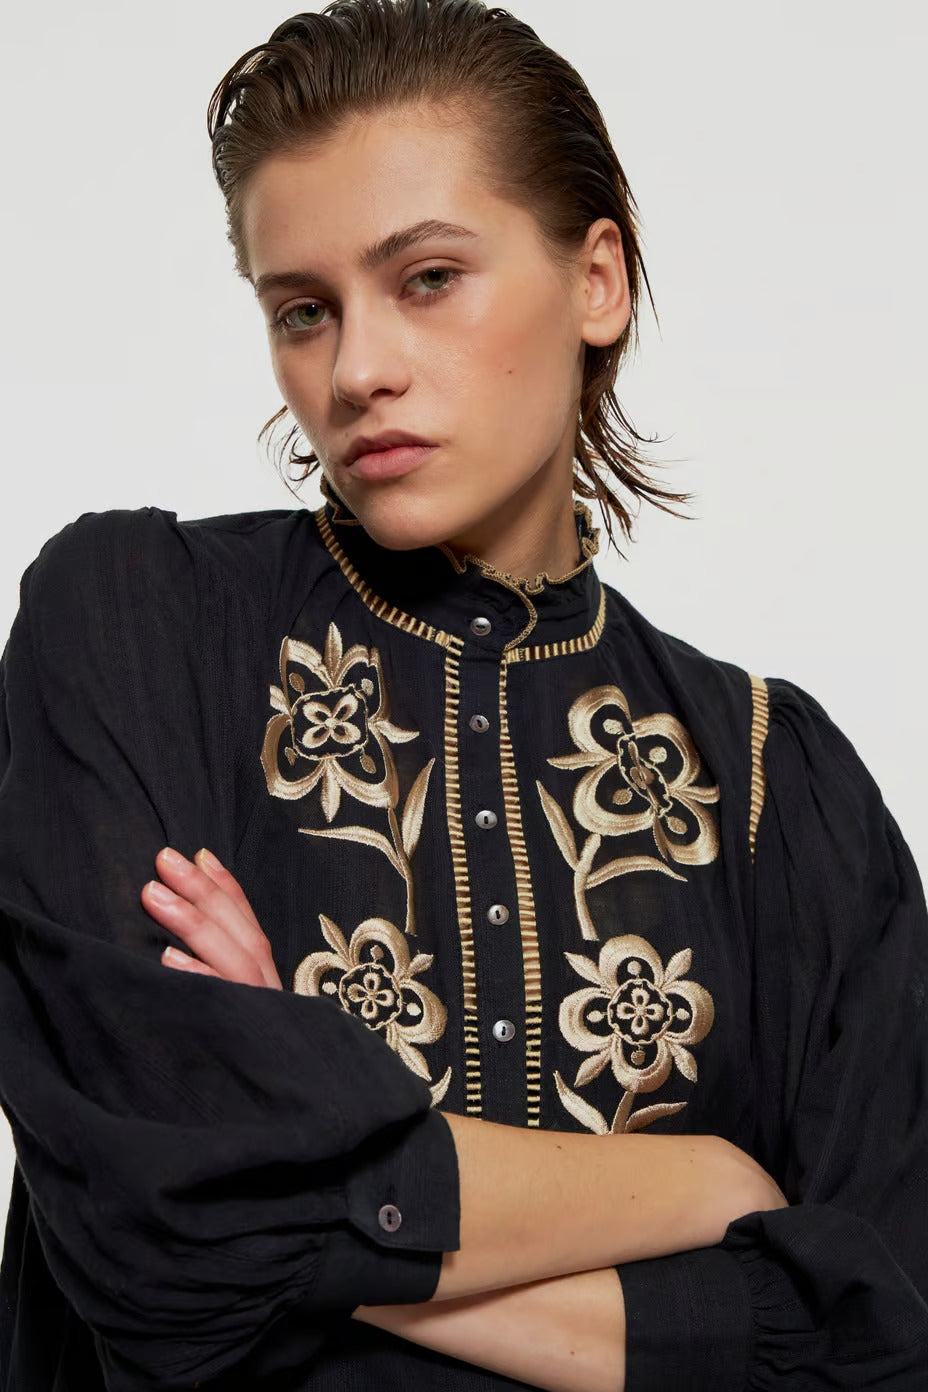 ANTIK BATIK _ Savoir Faire Ethical Artisan Made Fashion _ Boho Style Popover Cotton Mini Dress w/ Handstitched Gold Floral Embroidery on Black Hand loomed Cotton